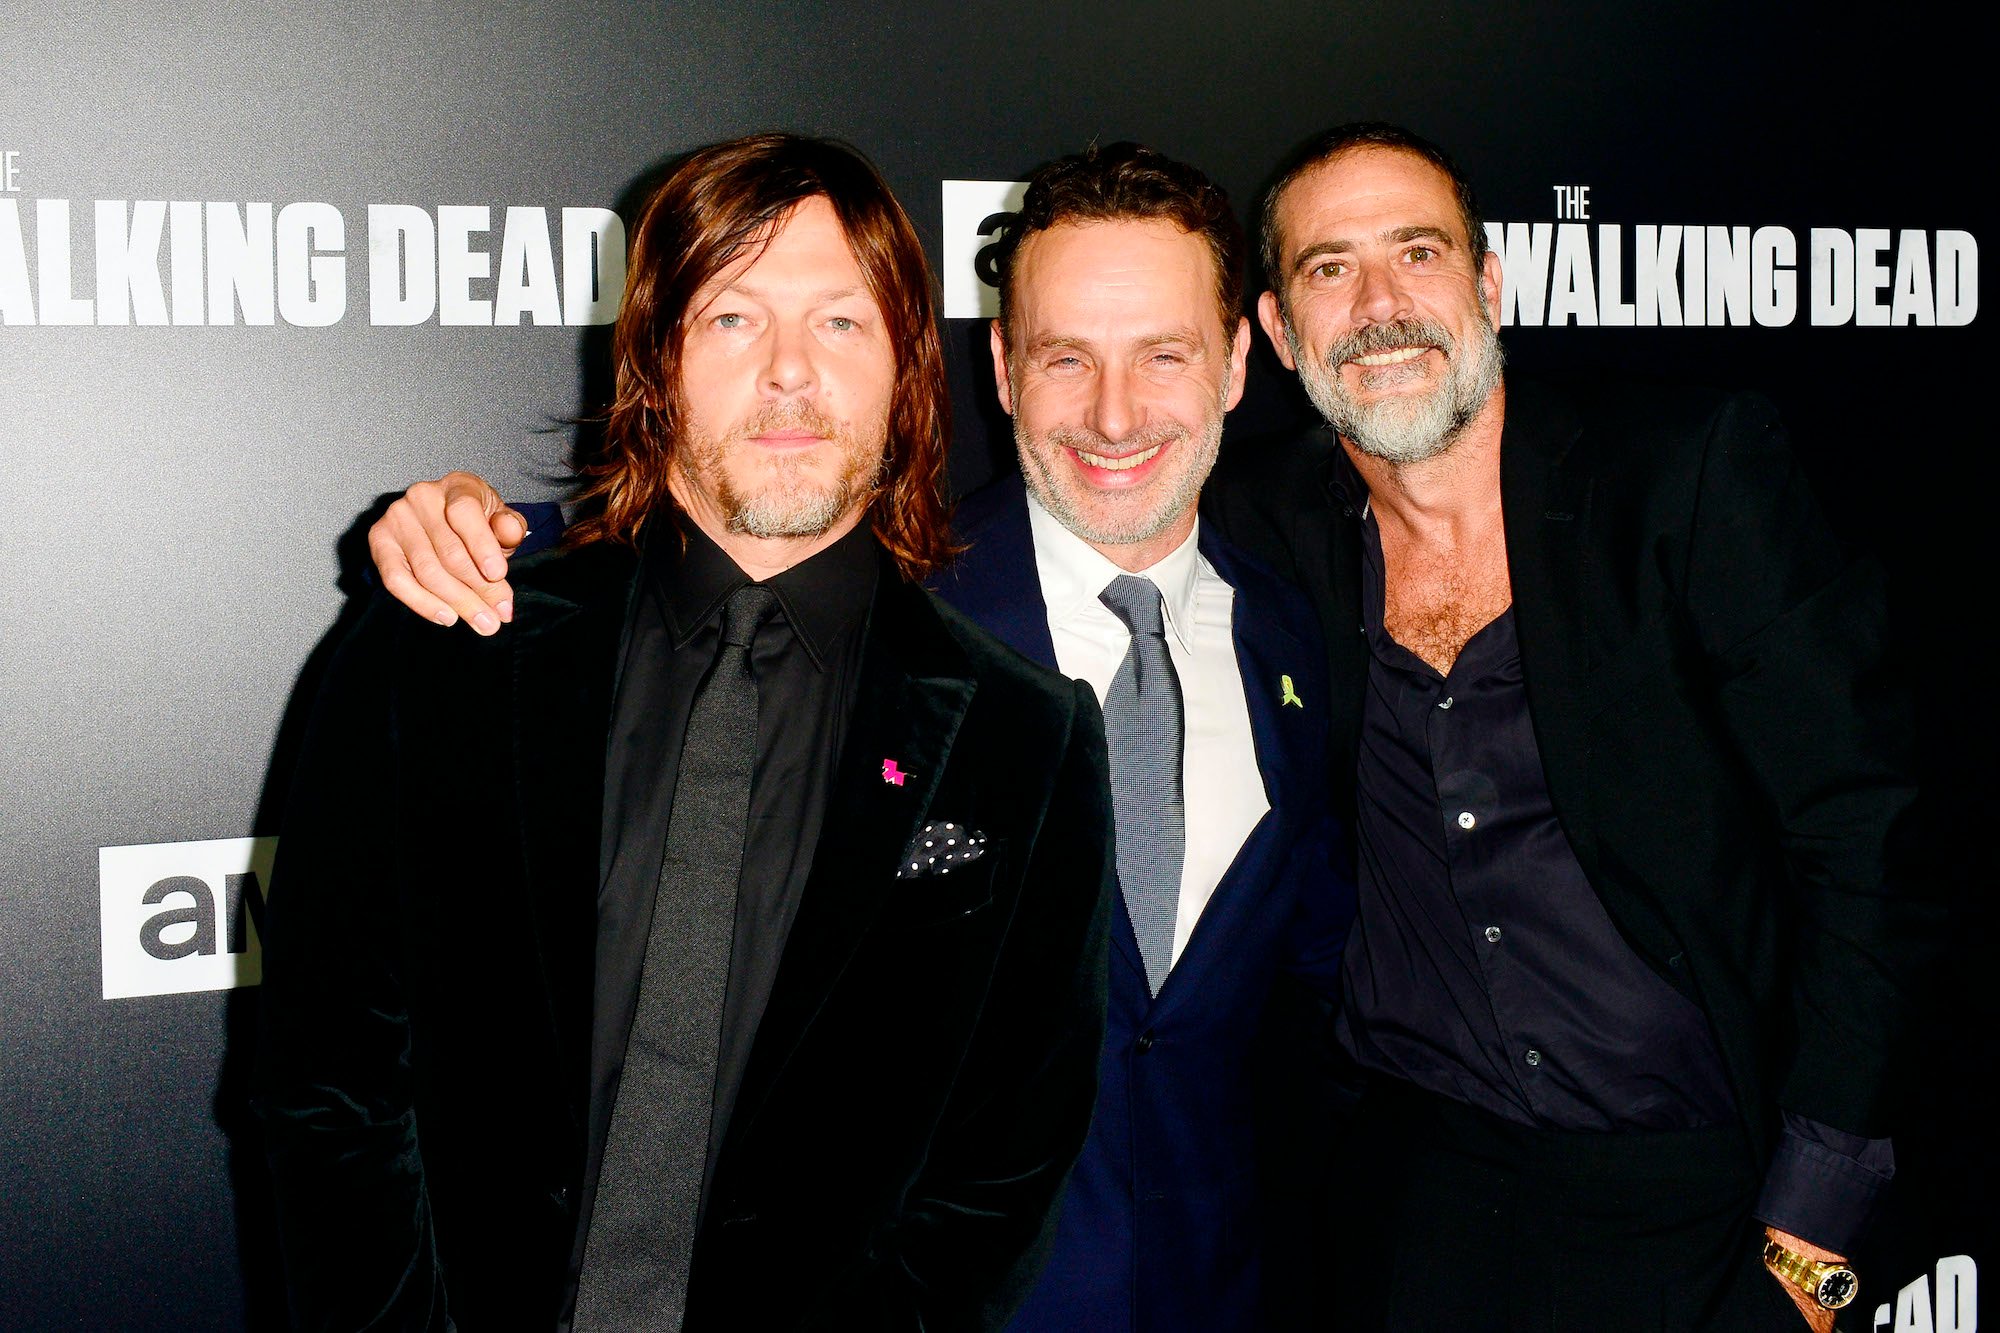 Cast members from 'The Walking Dead' in front of a black background